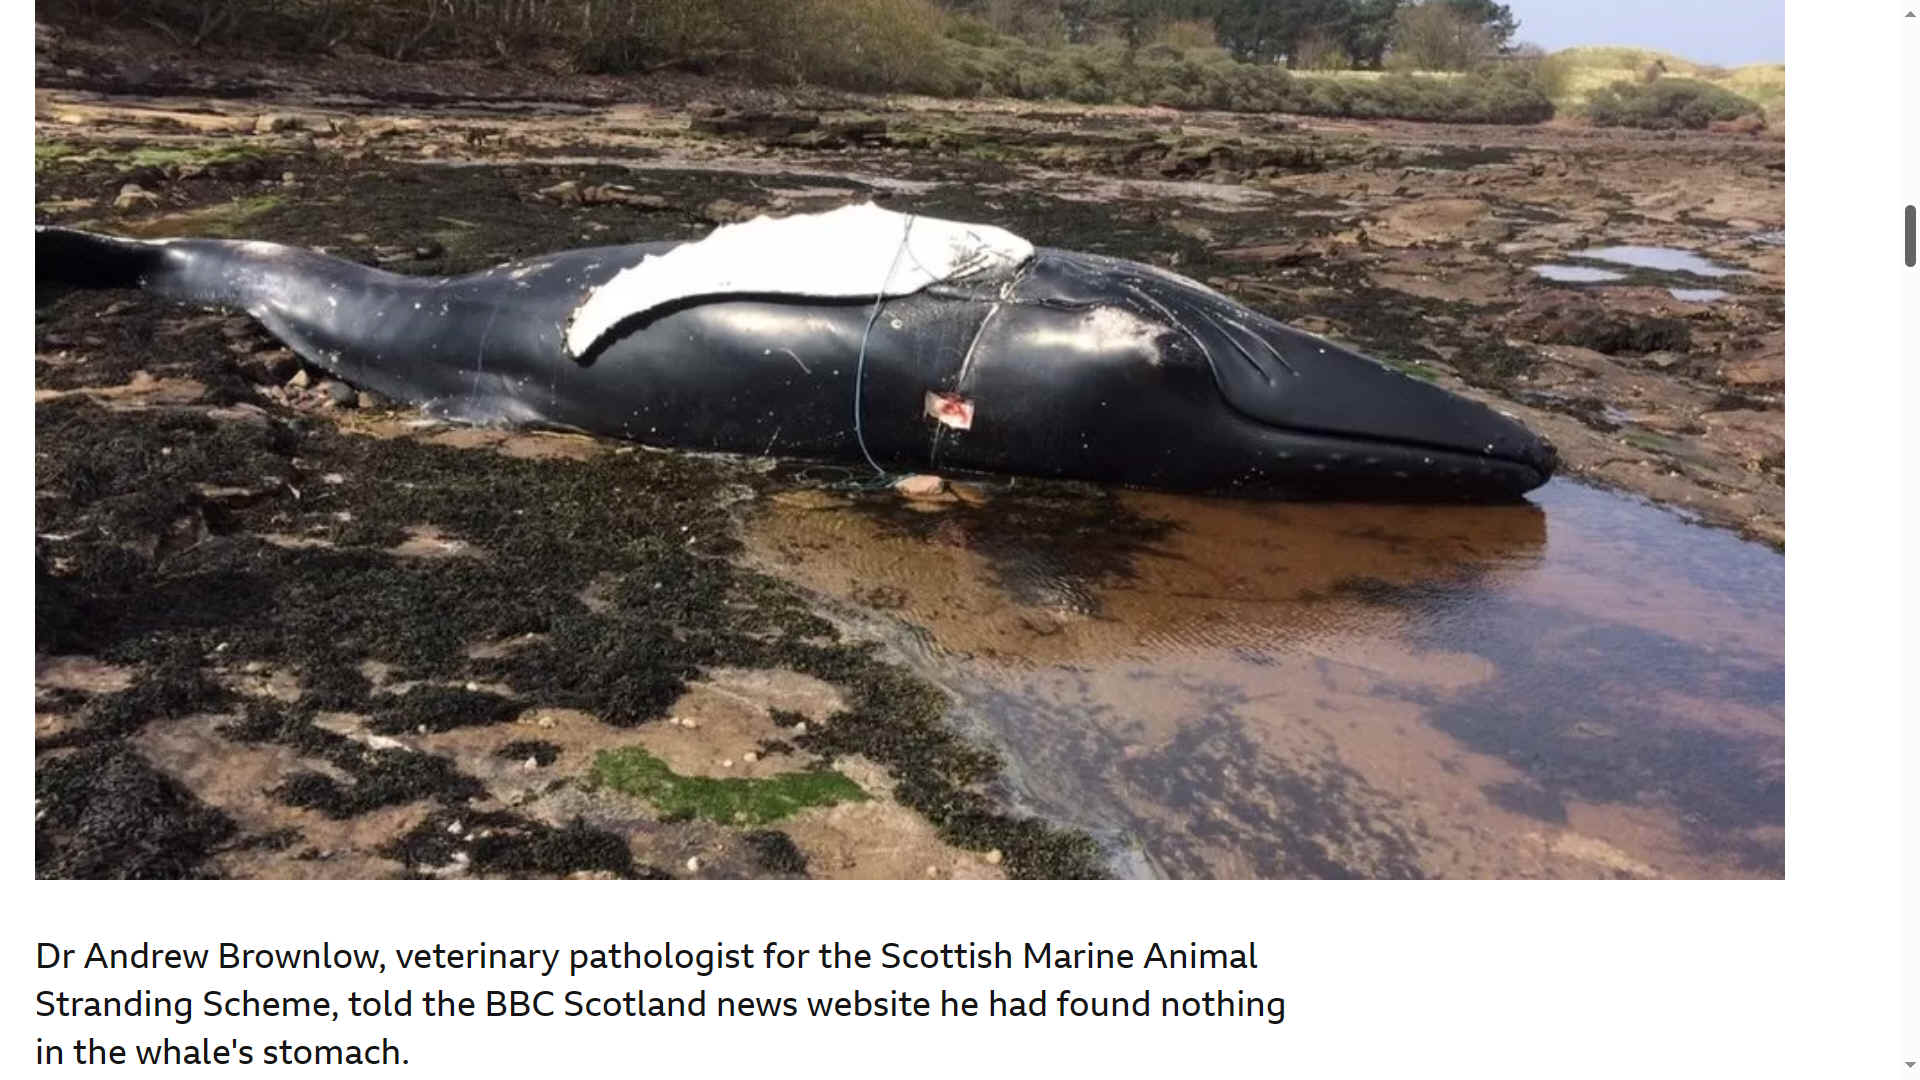 April 2019, a humpback whale drowned after being tangled in fishing netting off the coast of East Lothian